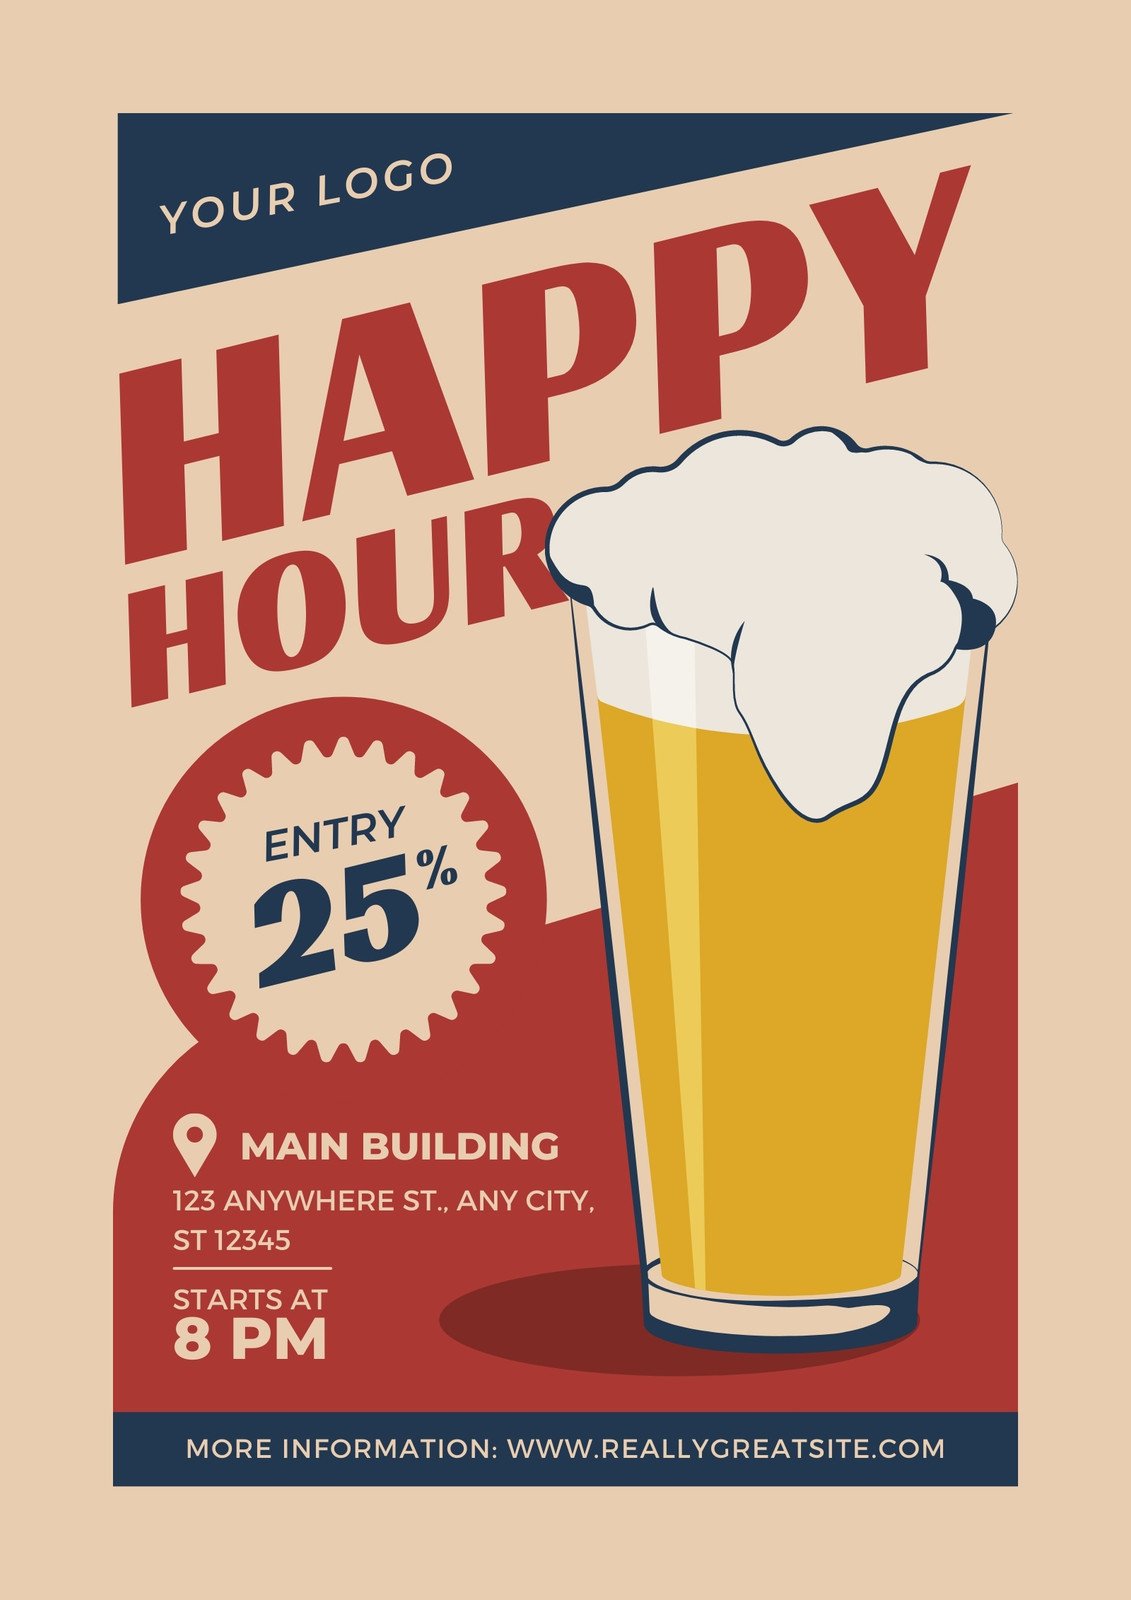 Free printable, customizable happy hour flyer templates Canva